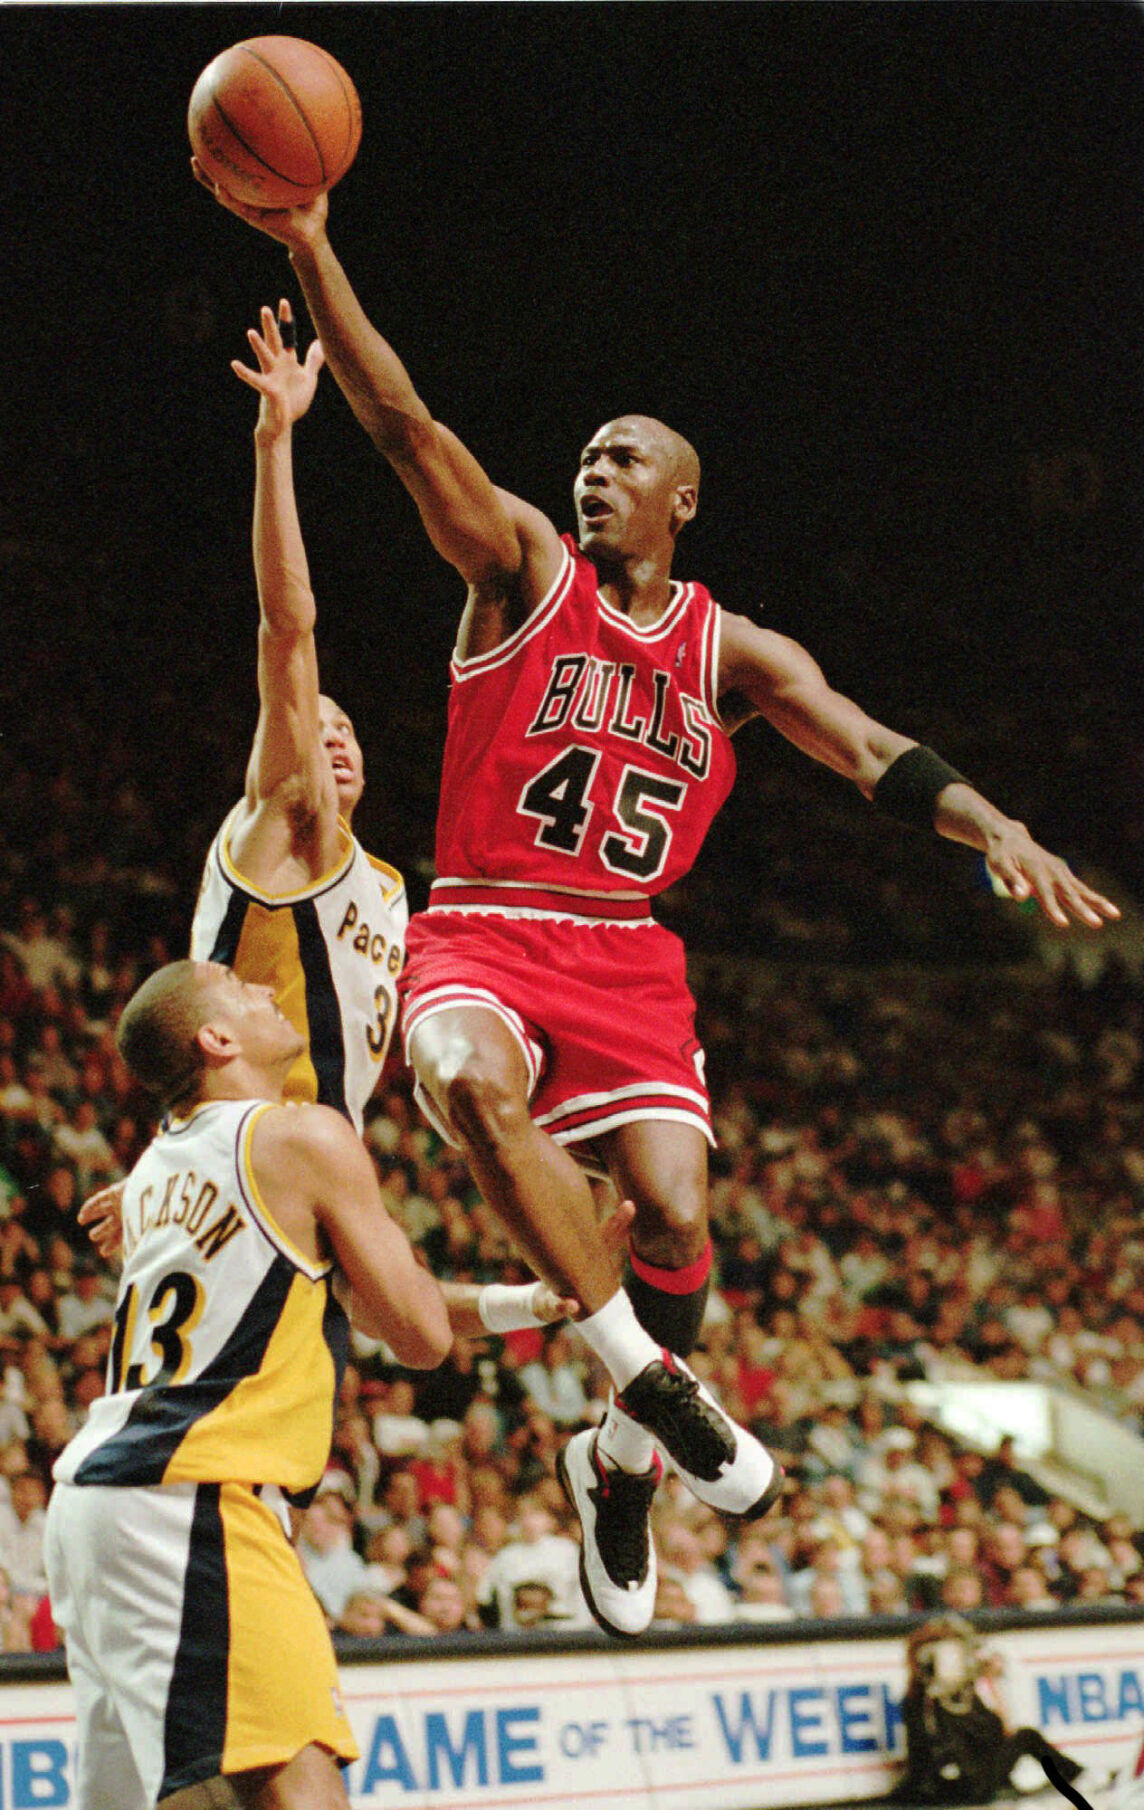 Today in History: March 19, Michael Jordan returns to basketball